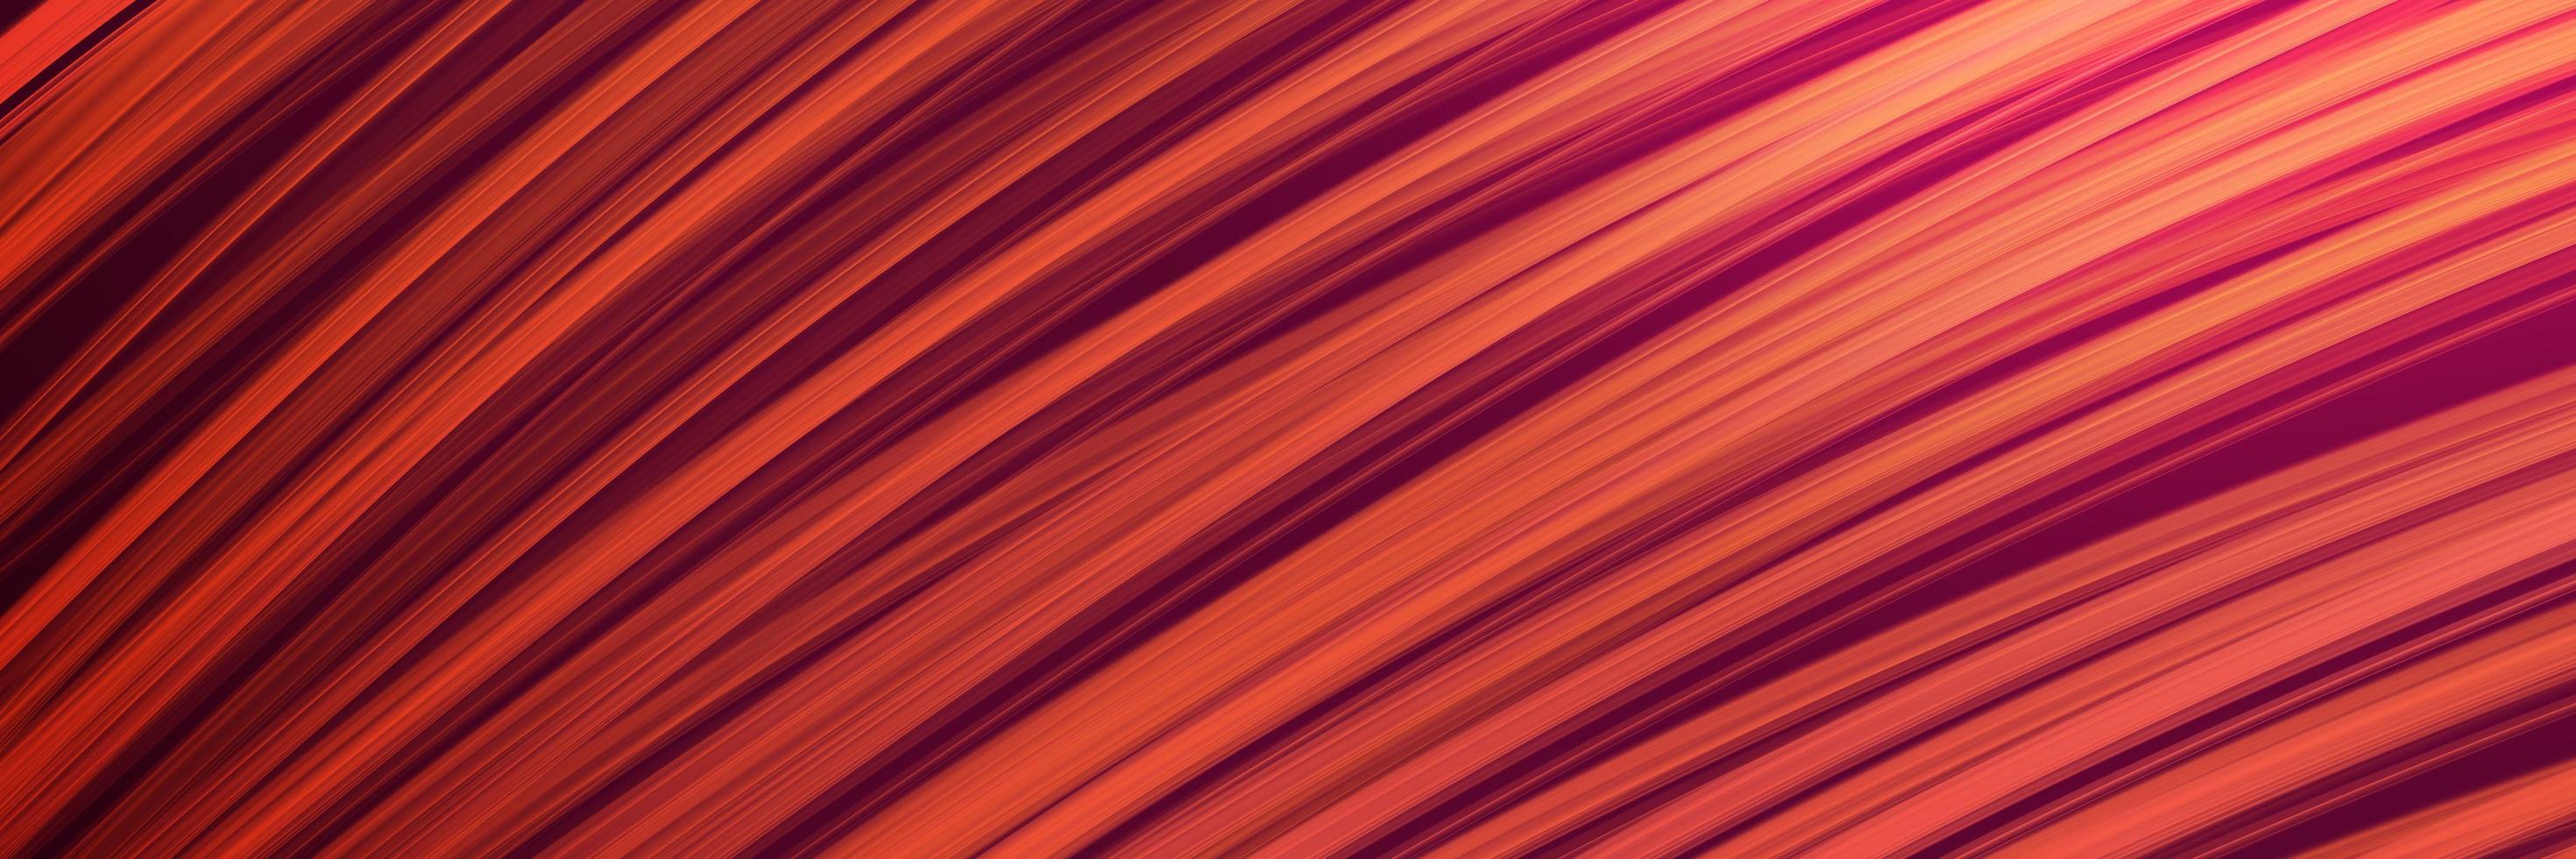 lines abstract background pattern in flame-themed color. painted wavy-grass texture elements for creative design. photo